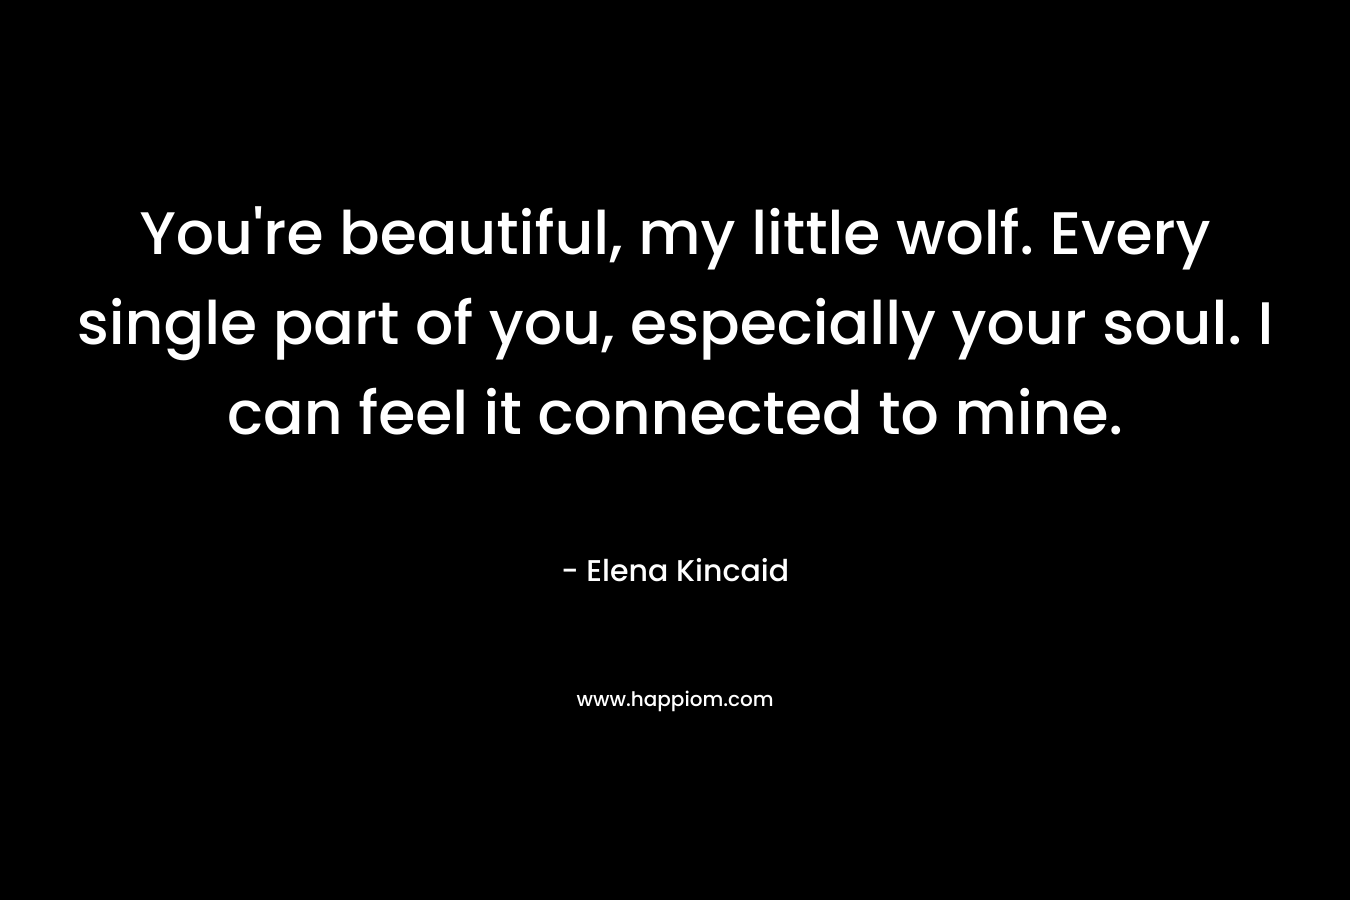 You're beautiful, my little wolf. Every single part of you, especially your soul. I can feel it connected to mine.